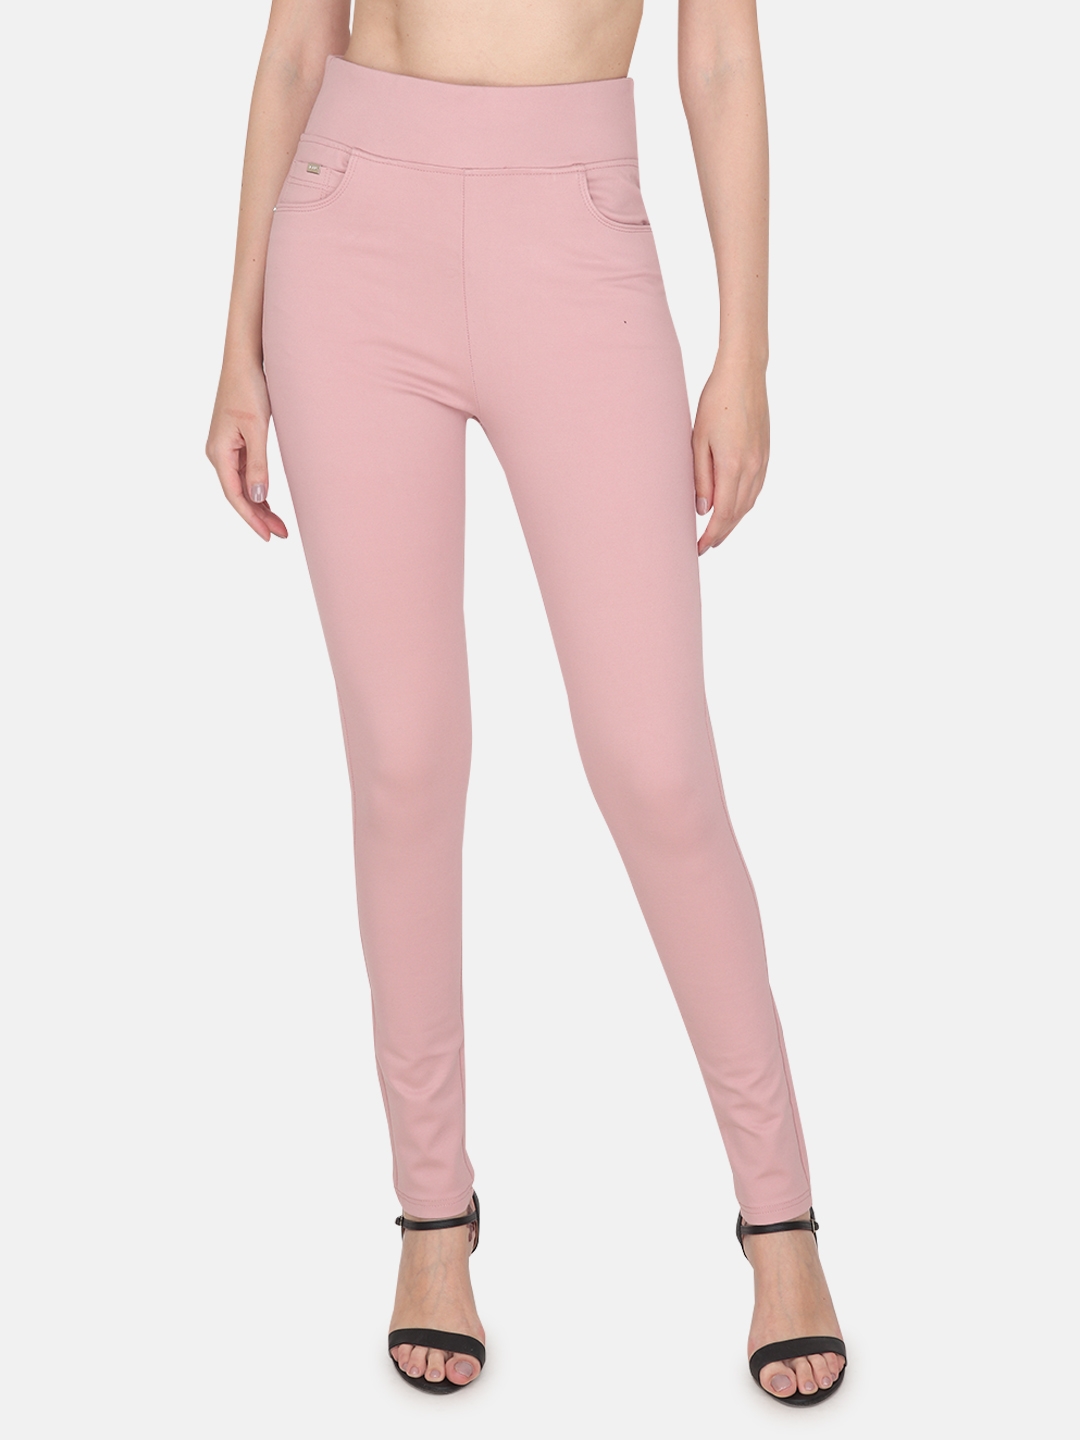 Albion By CnM Peach Women's Jeggings